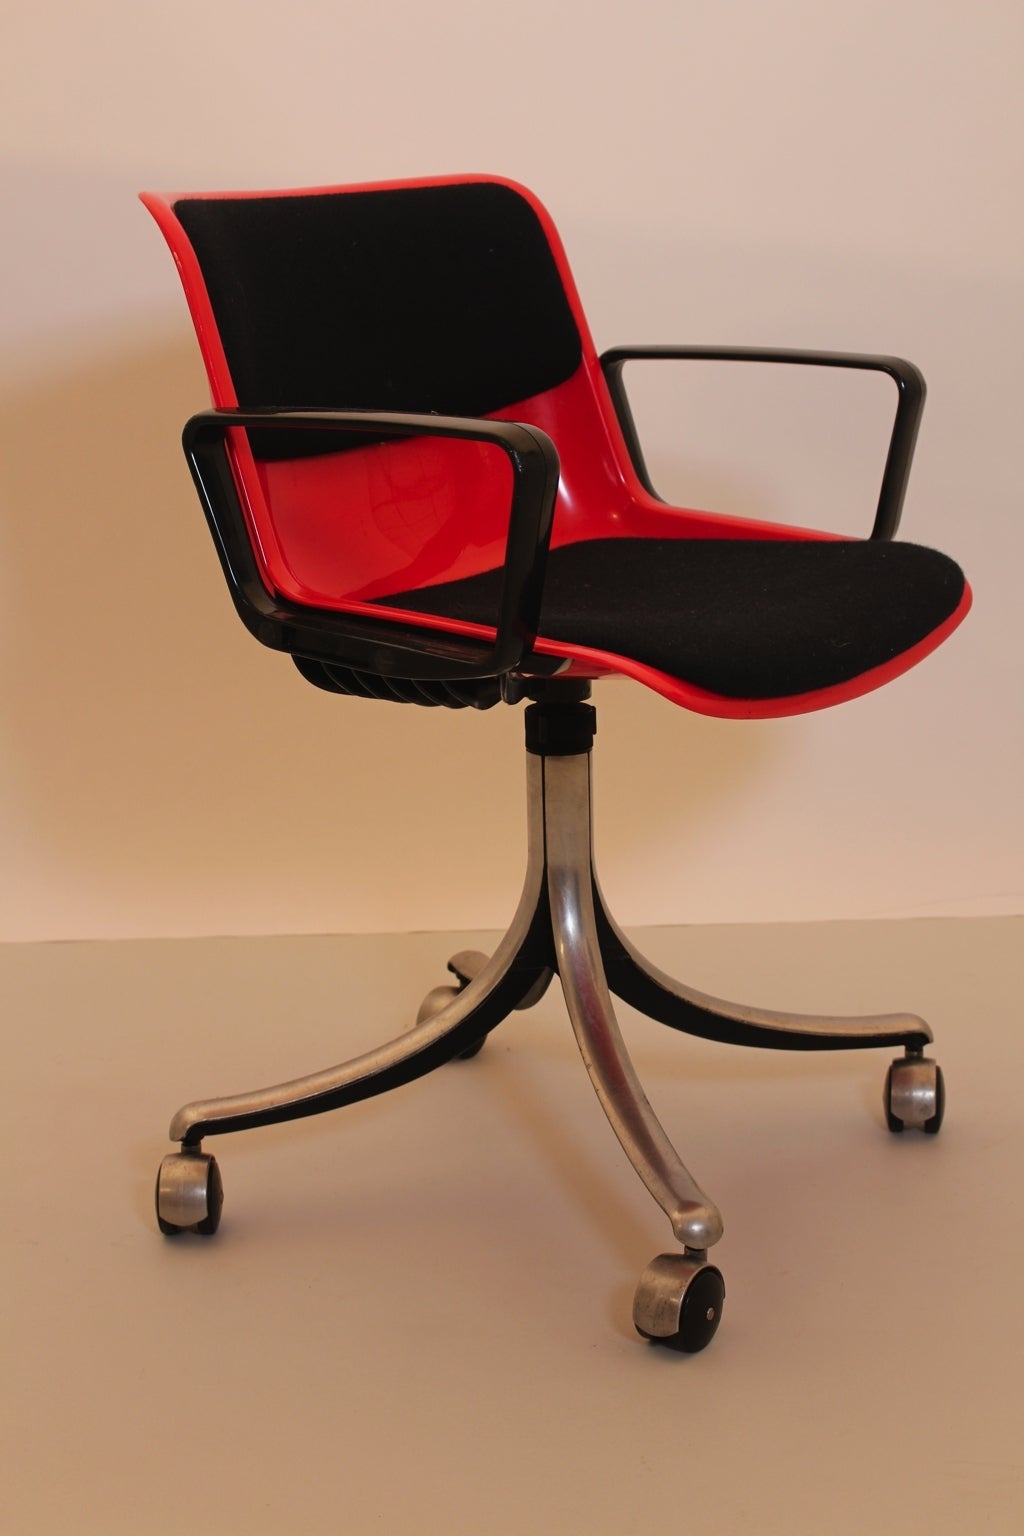 Red modernist swivelling desk chair by Osvaldo Borsani and produced by Tecno, Italy, 1970s.

Moulded red plastic seat with swivel function and upholstered with black fabric.
Aluminium base.